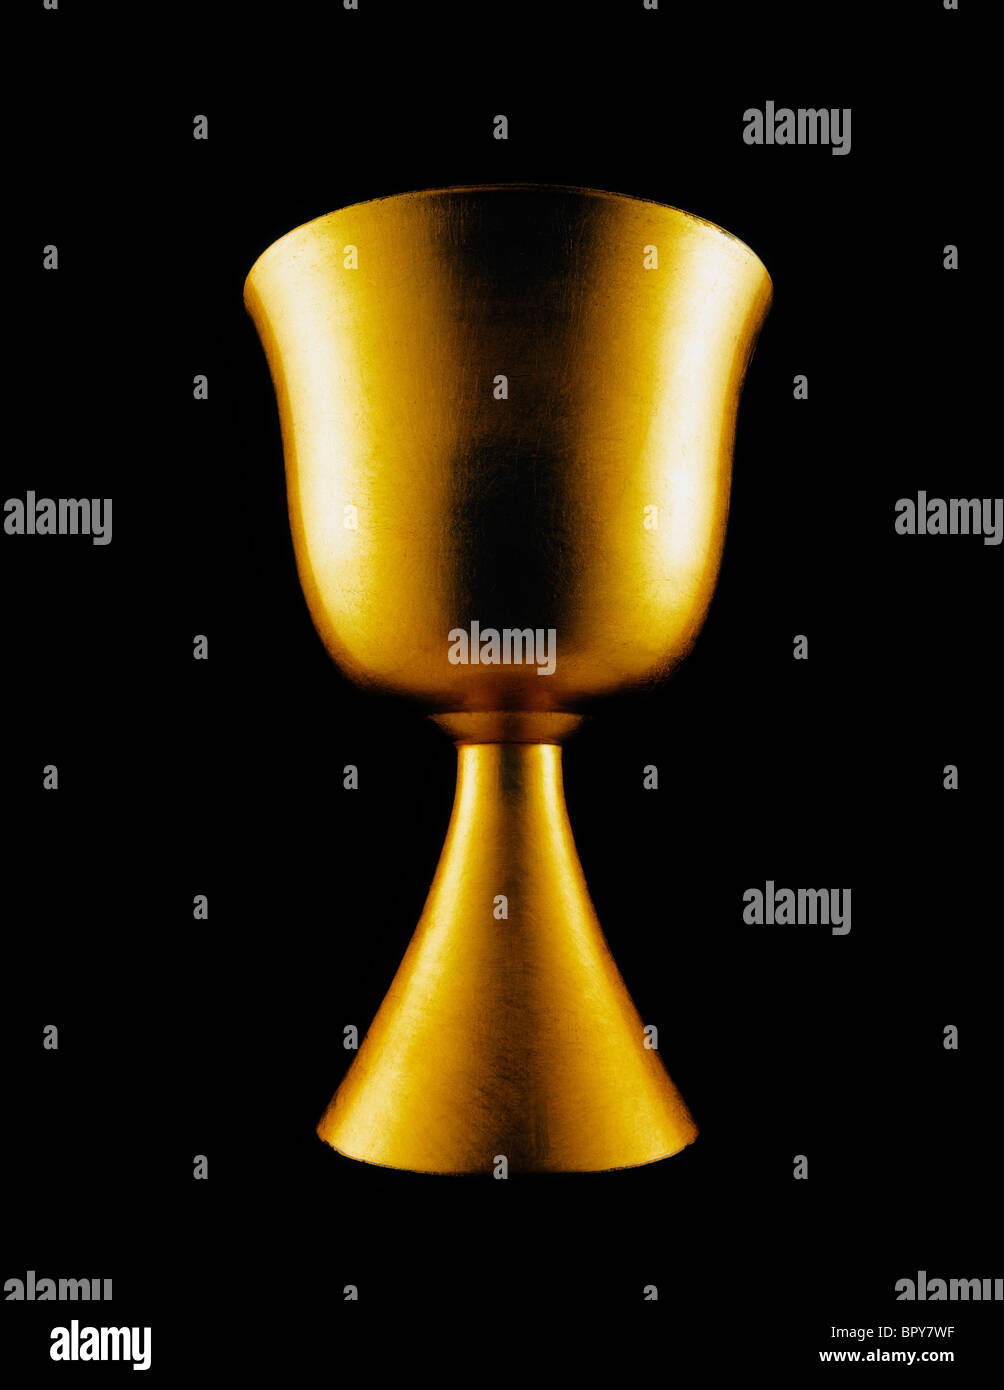 A gold chalice on black background capturing the glory and authority of the Christianity. Stock Photo